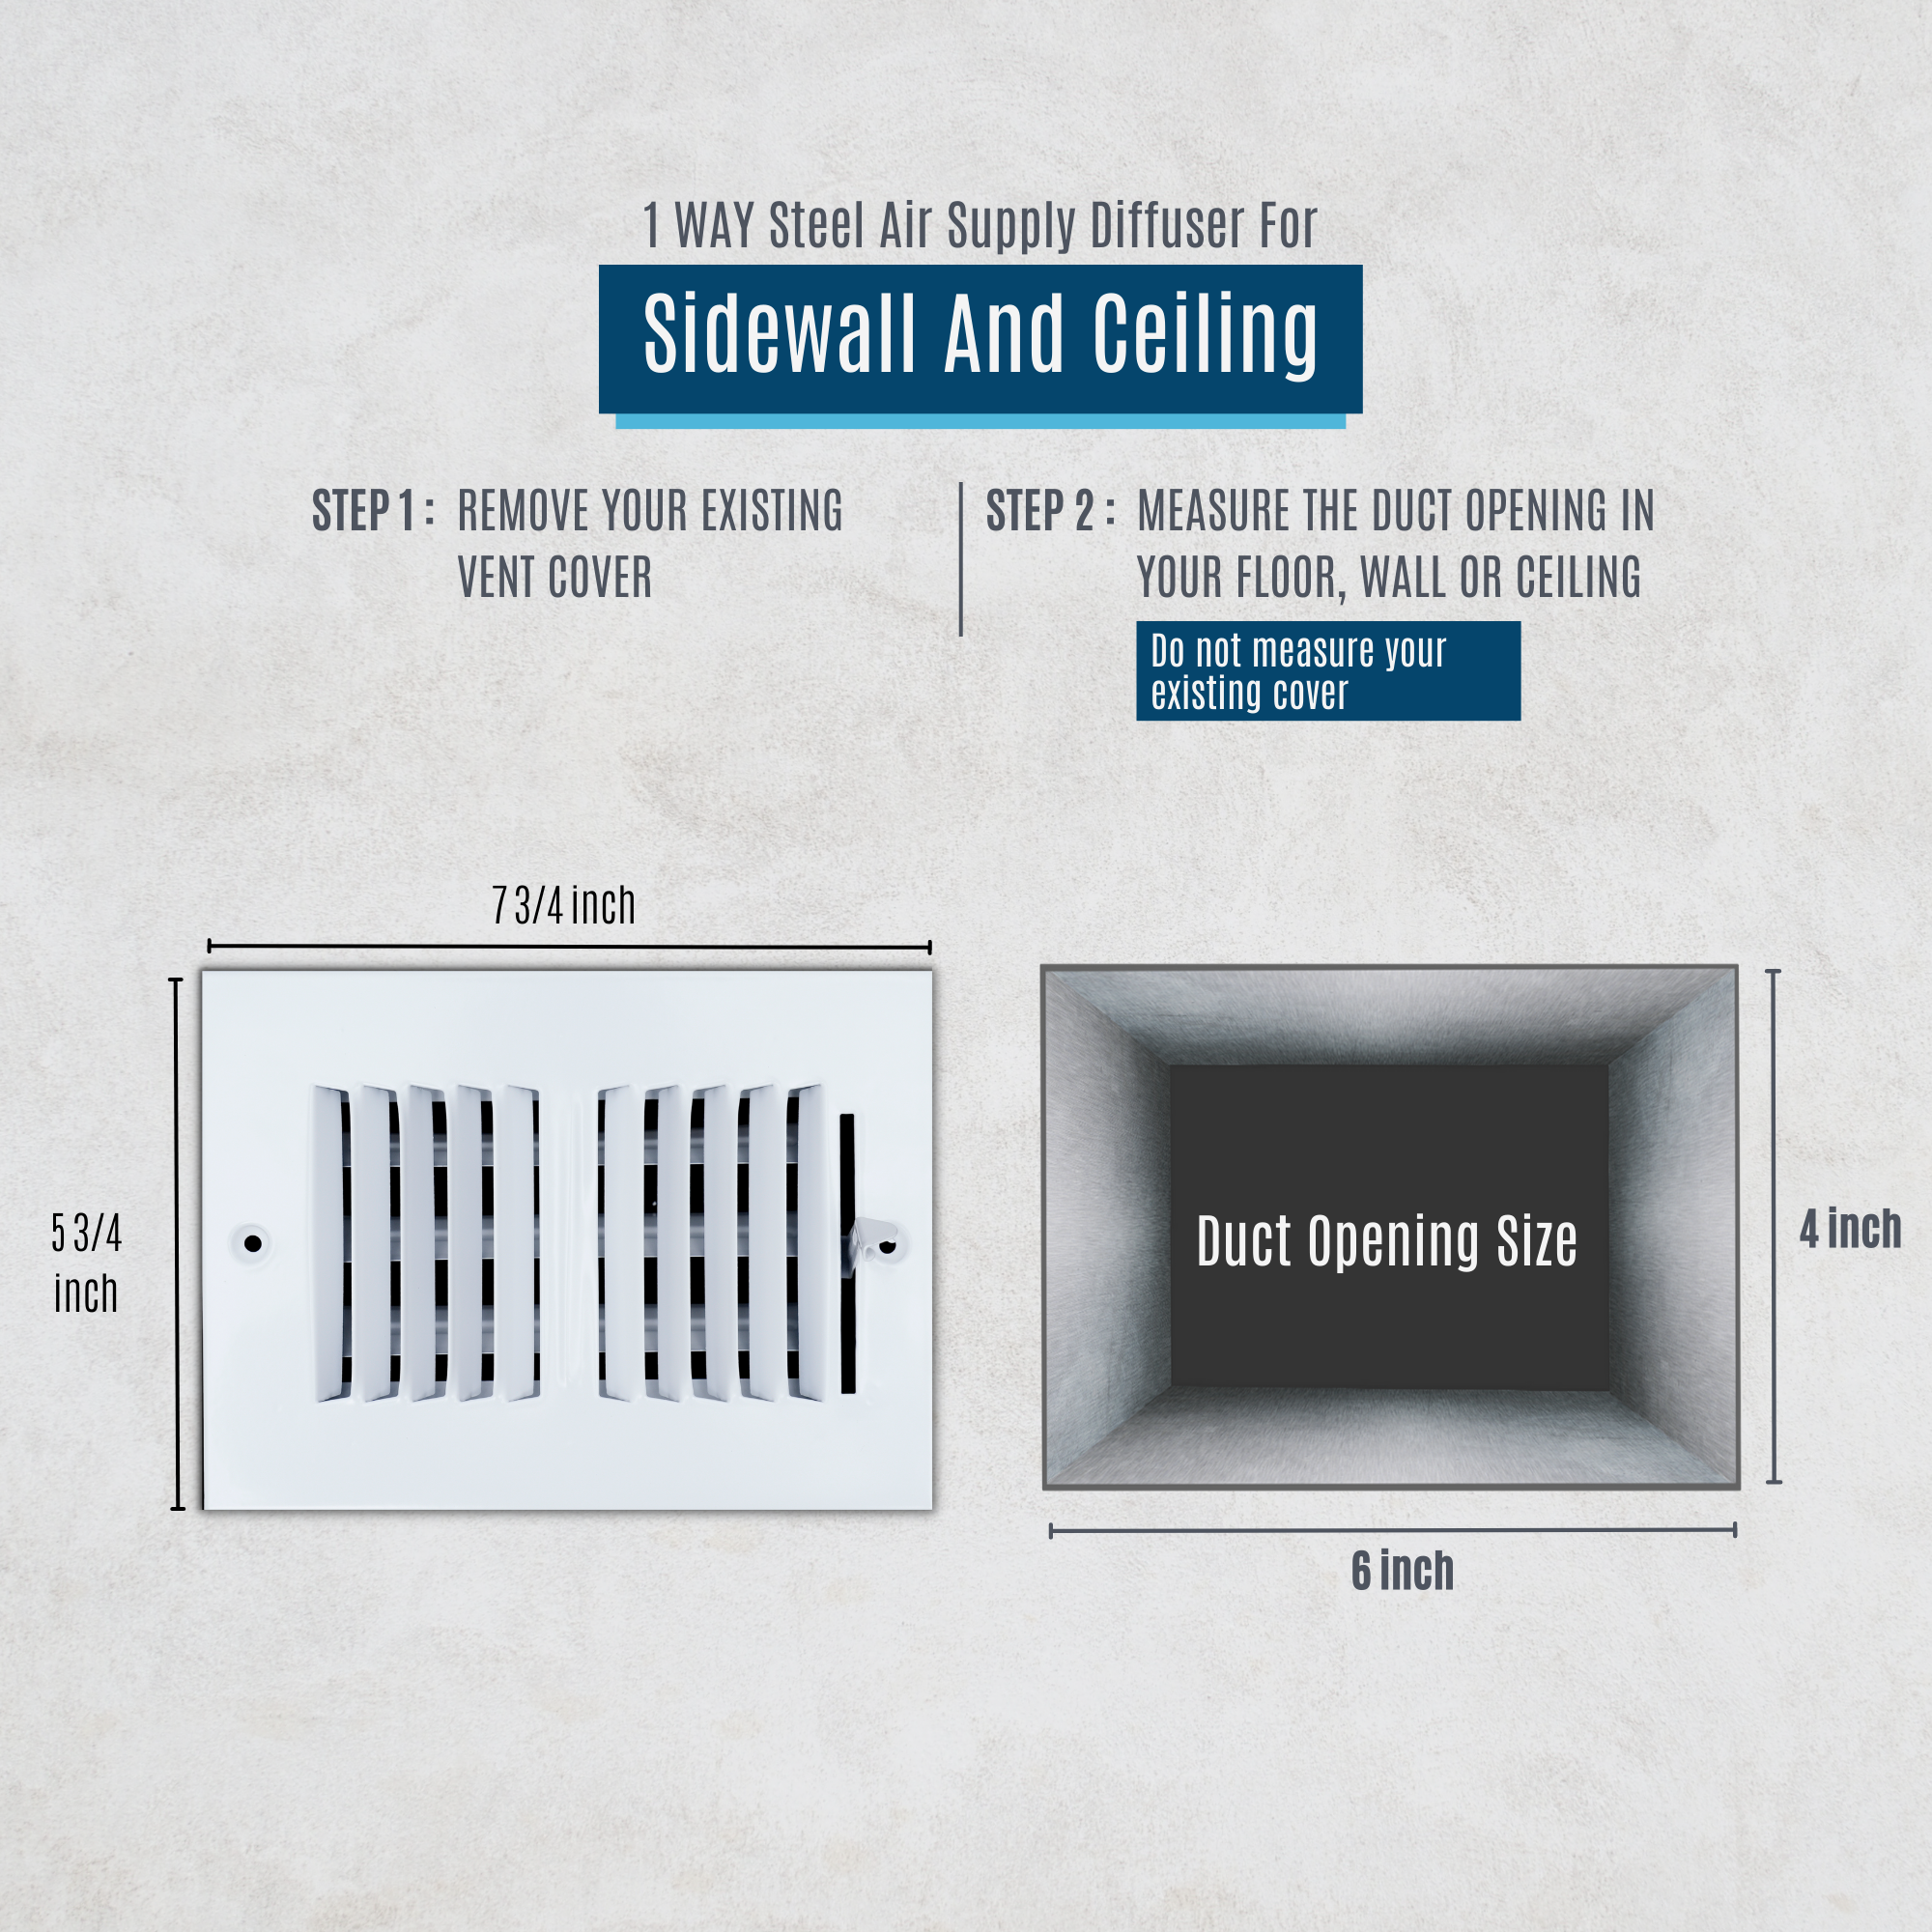 6 X 4 Duct Opening | 2 WAY Steel Air Supply Diffuser for Sidewall and Ceiling